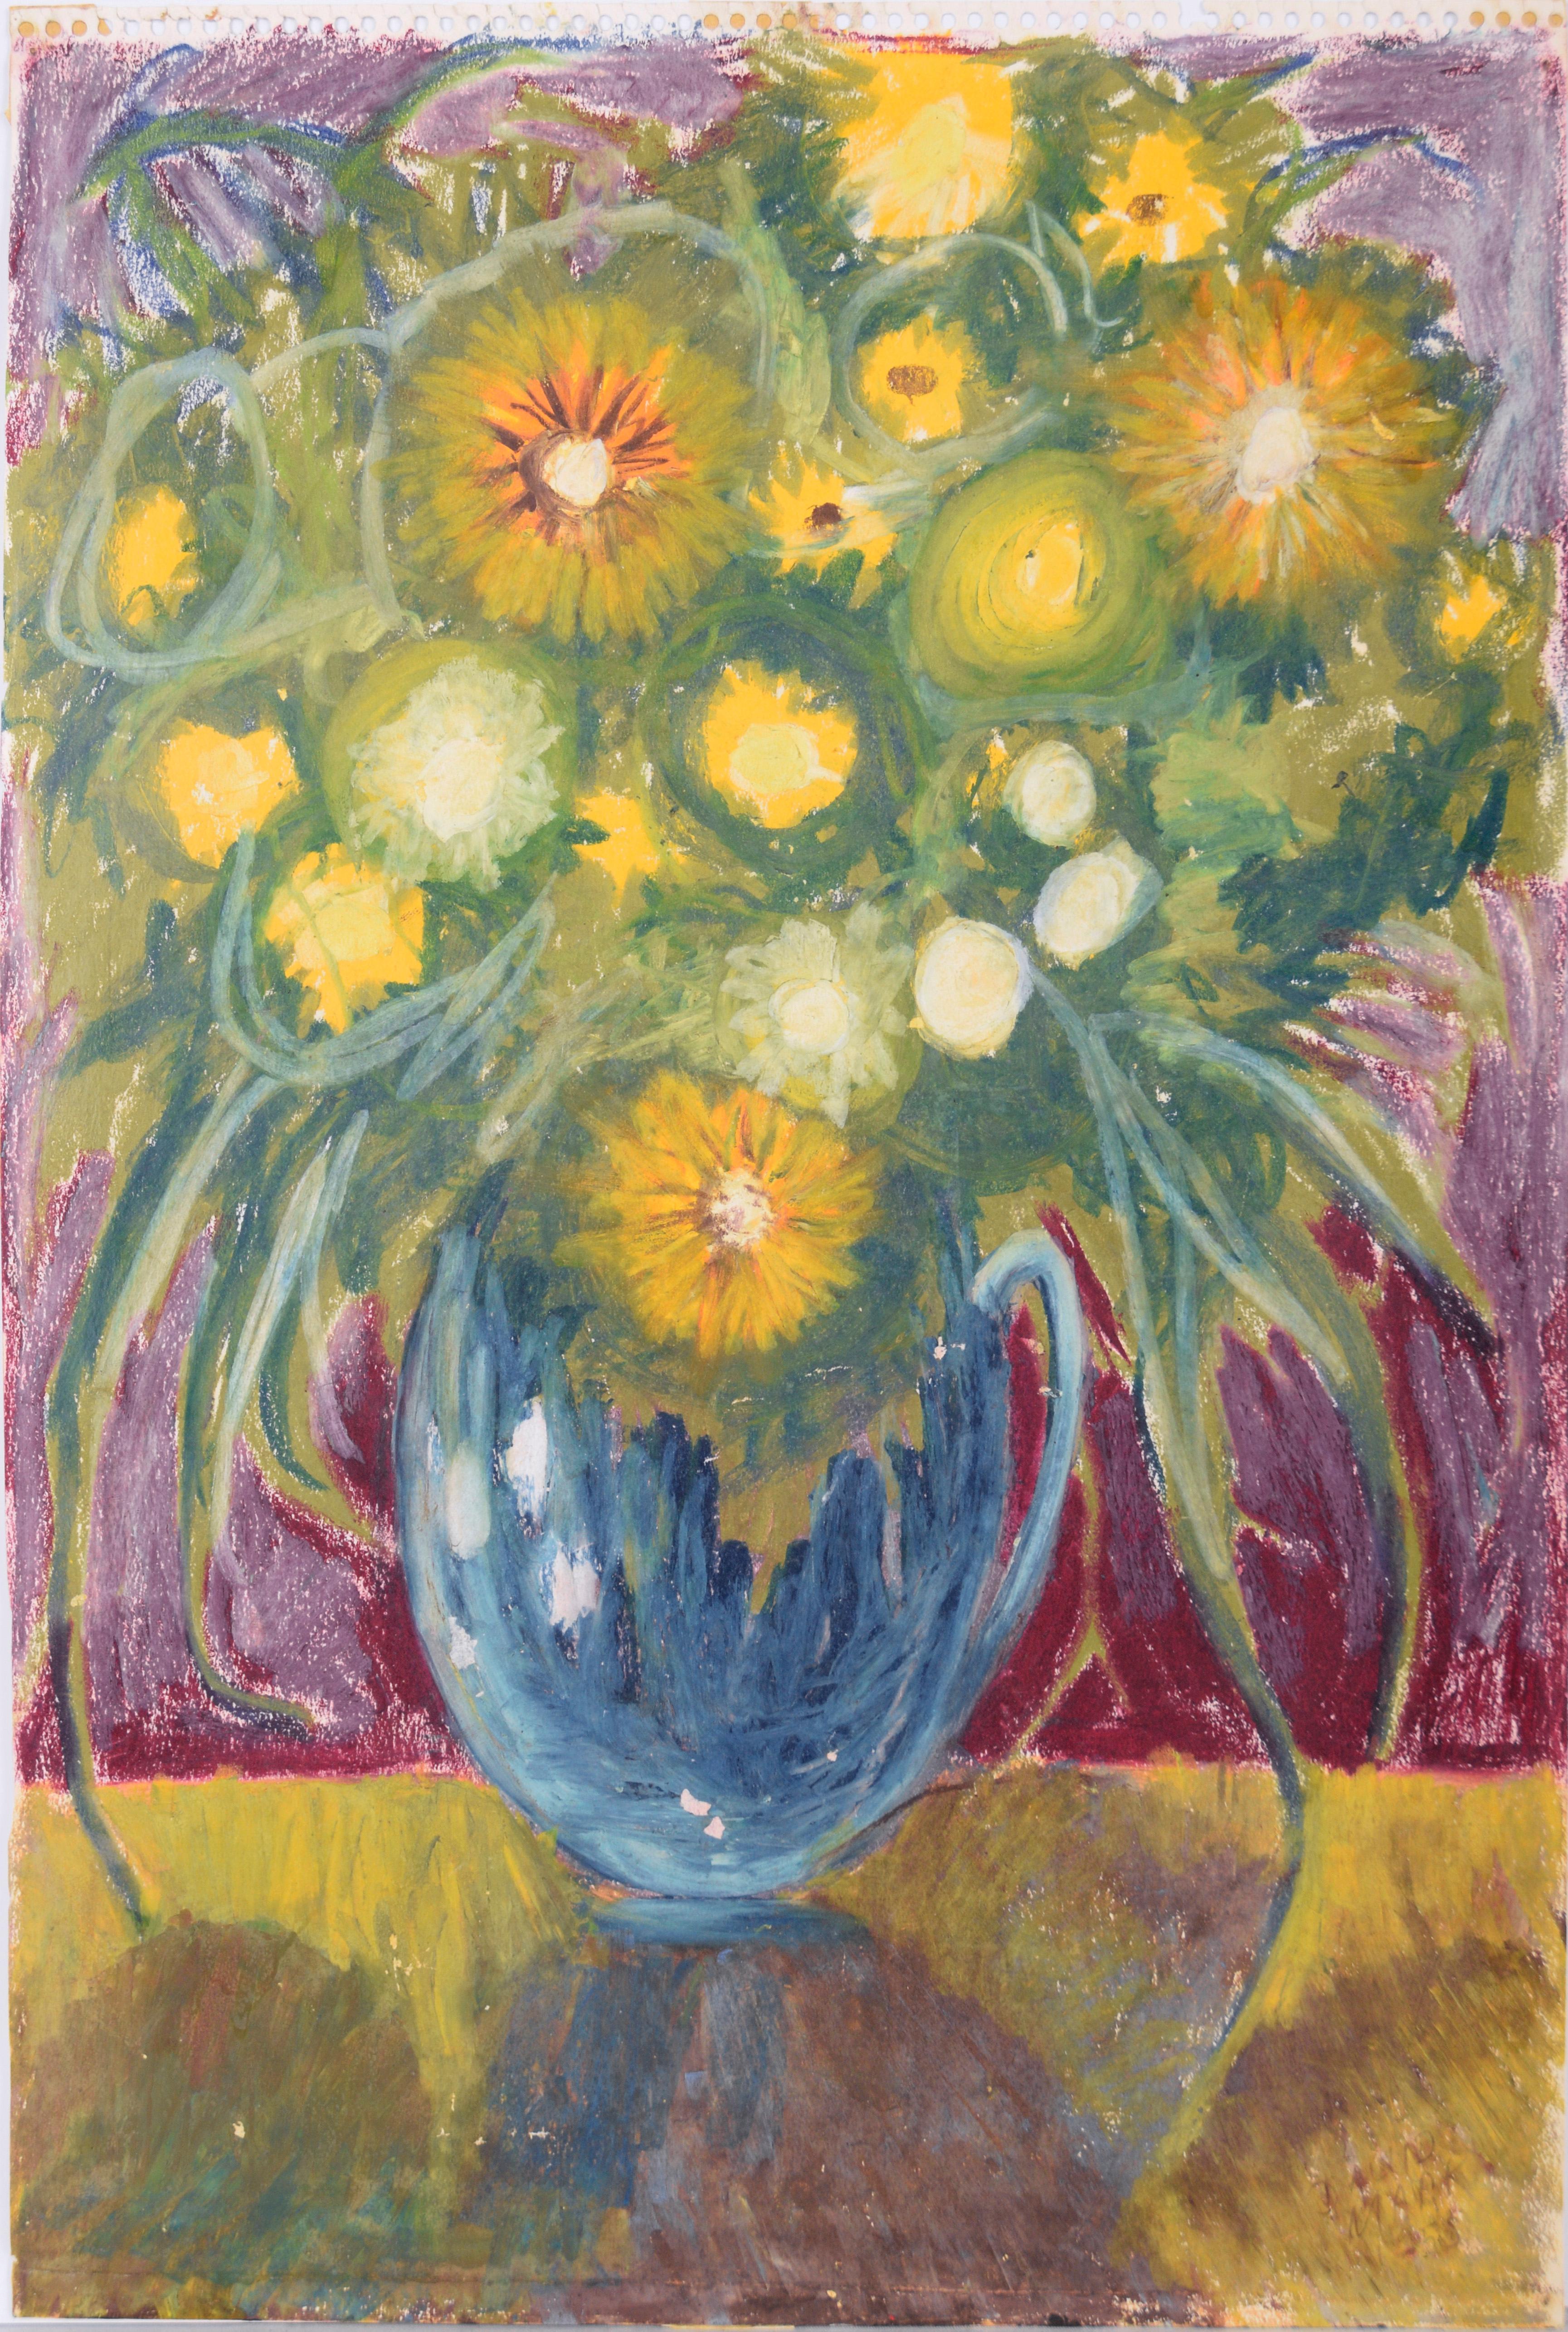 Daisies and Sunflowers - Still Life Oil Pastel on Paper - Art by David Mark